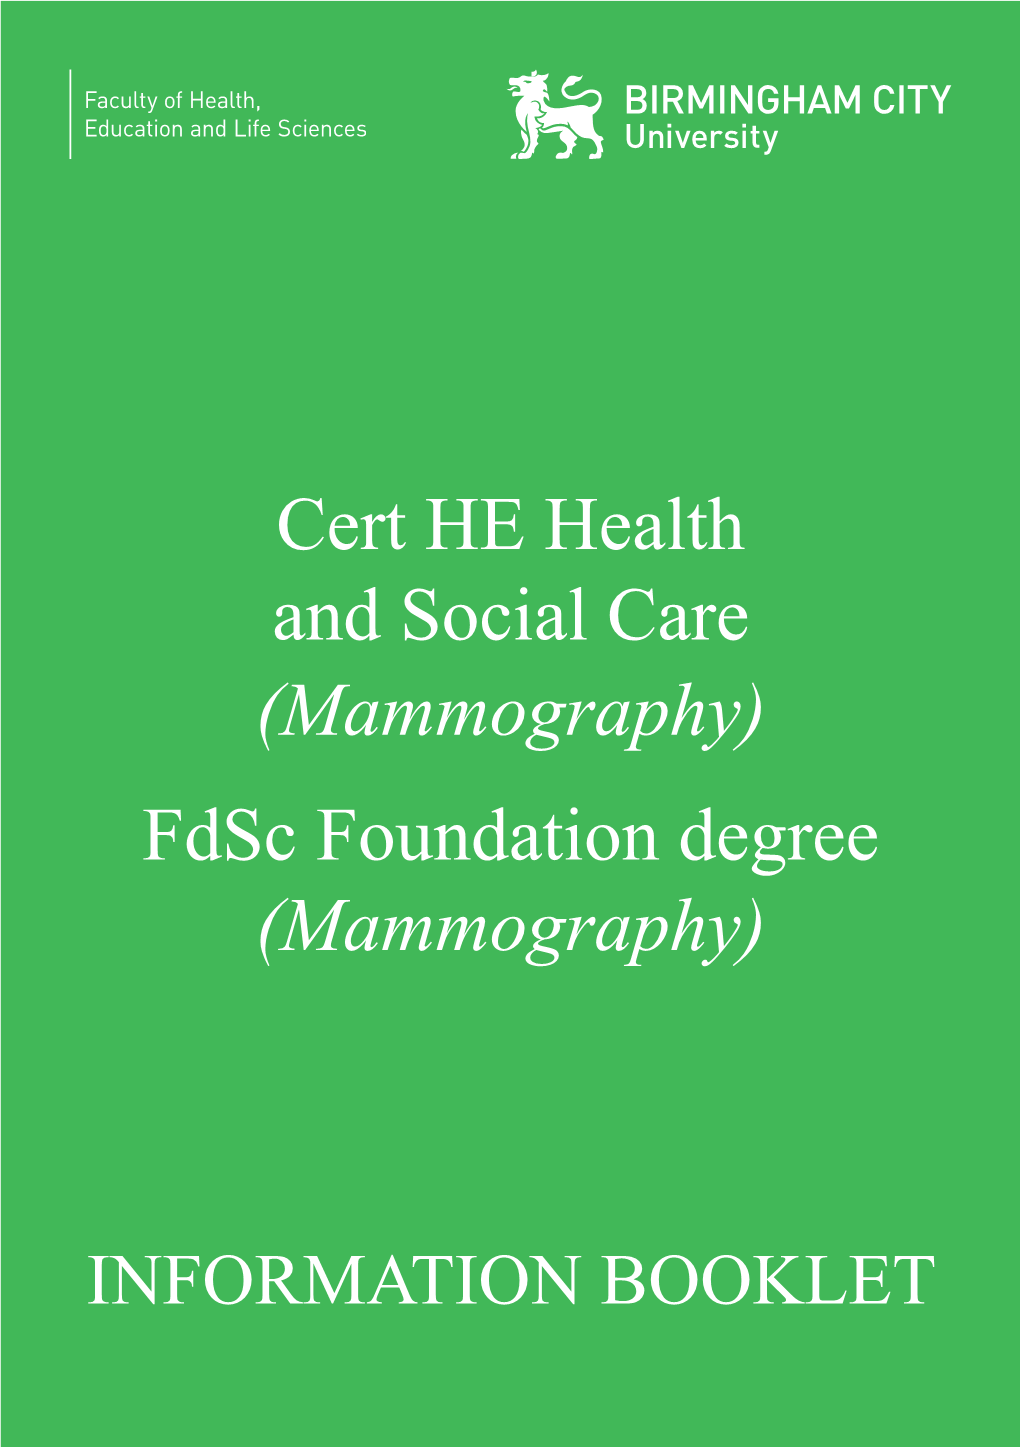 Cert HE Health and Social Care (Mammography) Fdsc Foundation Degree (Mammography)